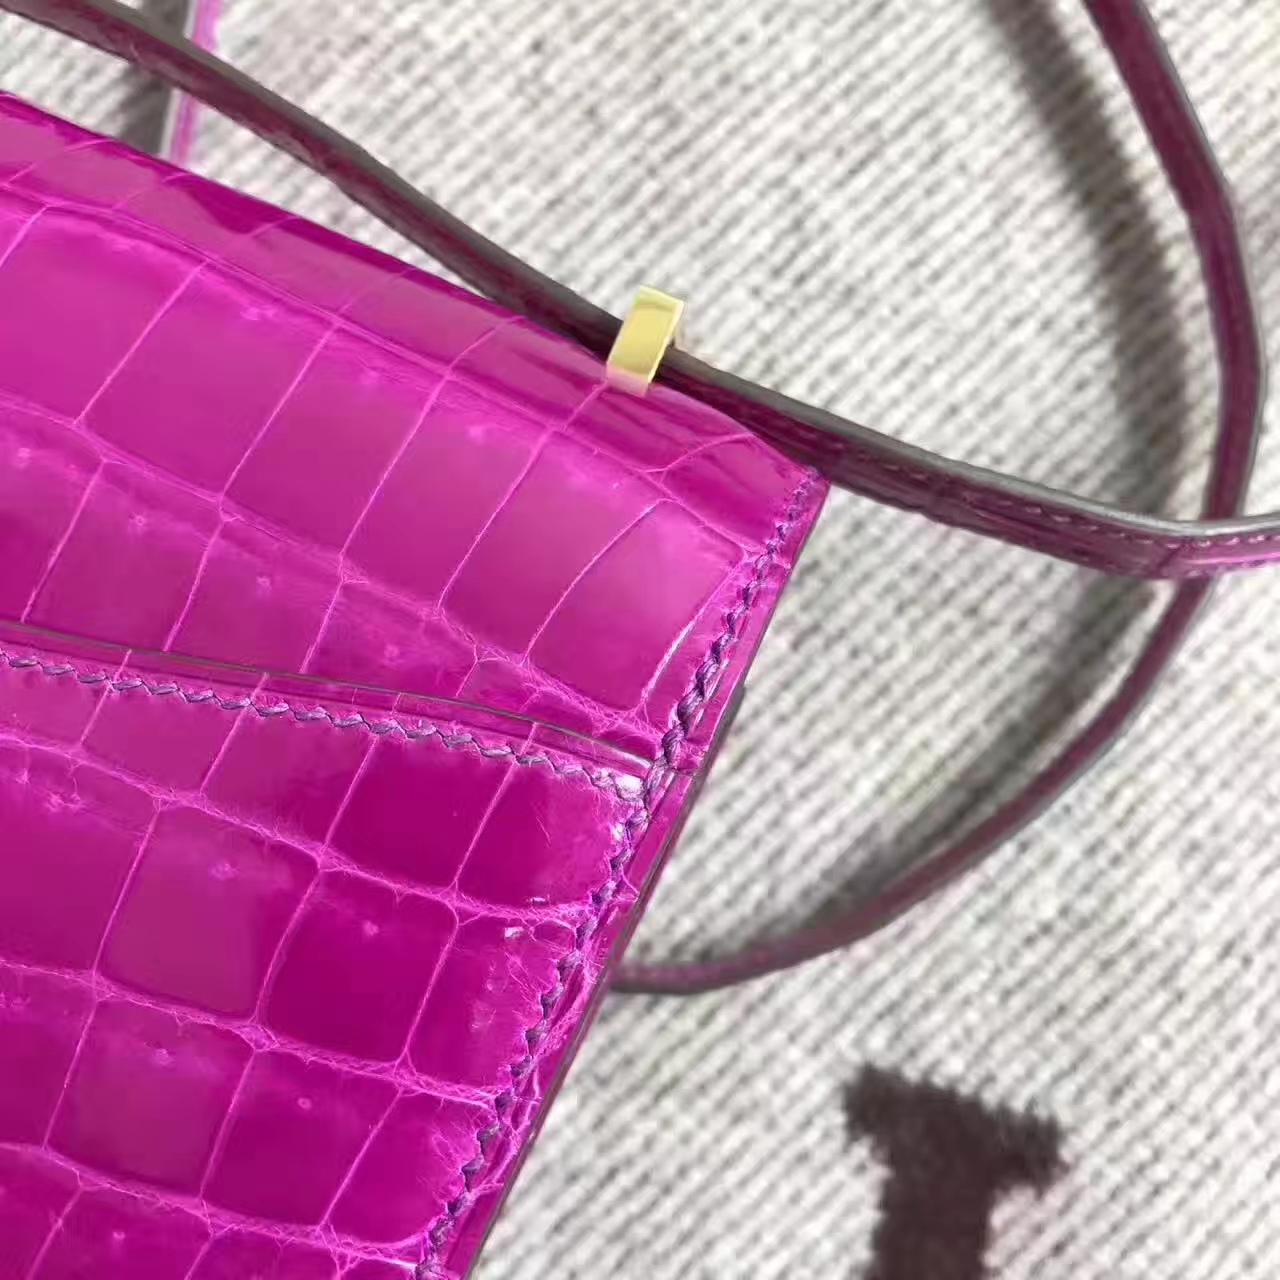 Hand Stitching Hermes Crocodile Shiny Leather Constance19cm in J5 Rose Scheherazade